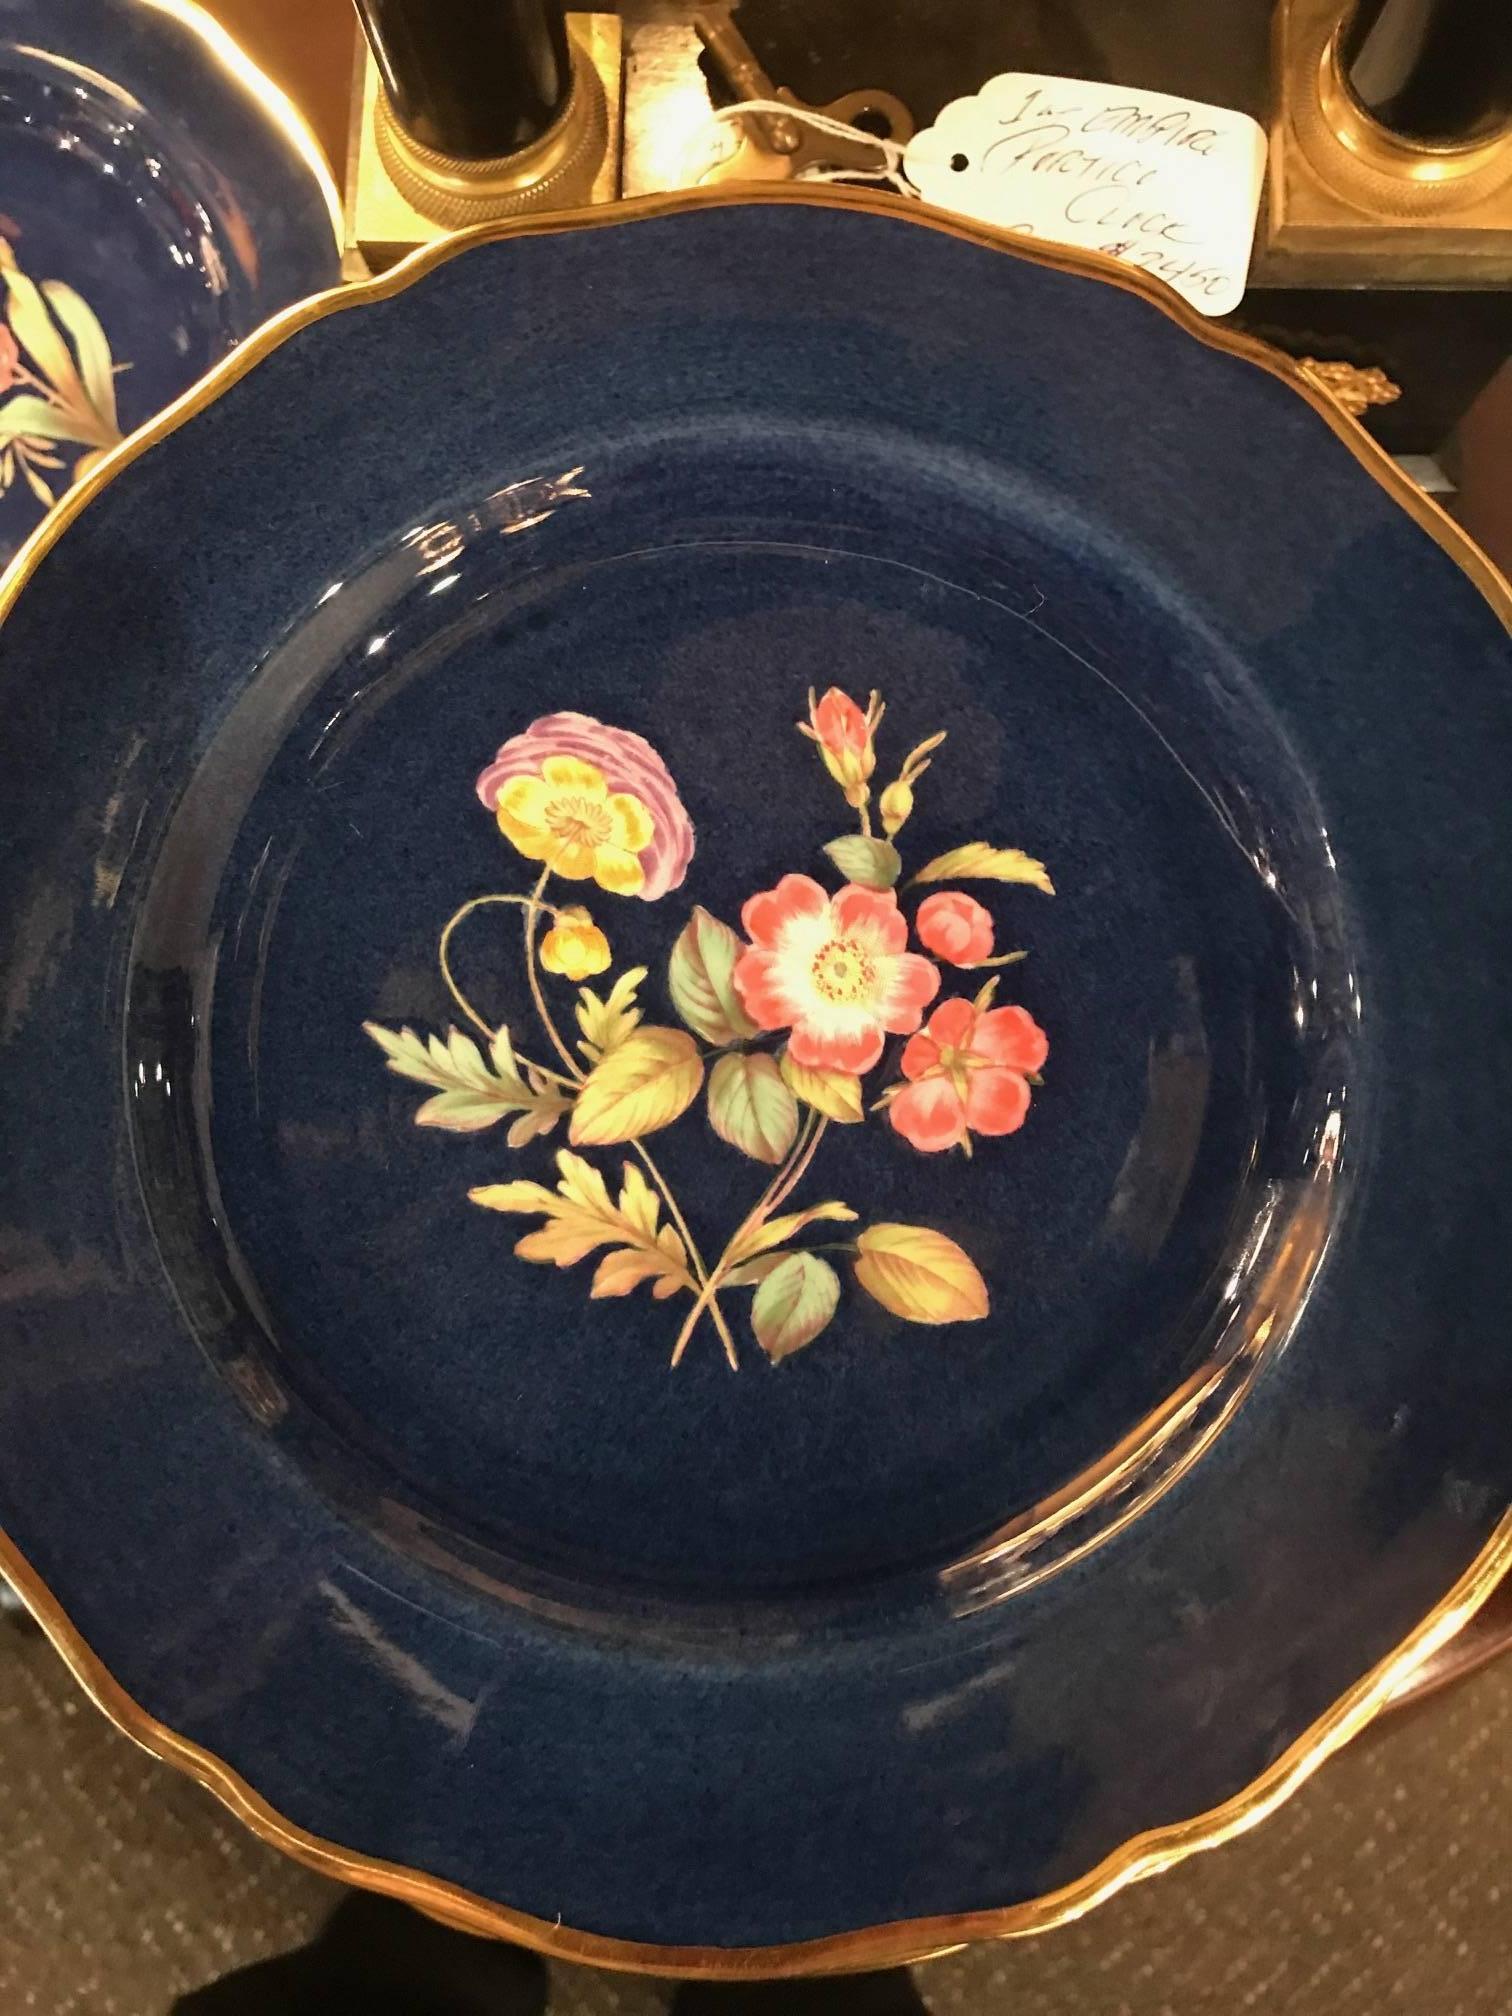 12 cobalt background botanical plates made by Spode Copeland. Each plate is a different hand painted botanical center with the name of the flower identified on the back. Simple gold band around the scalloped edge. Rich color sets off the beautifully